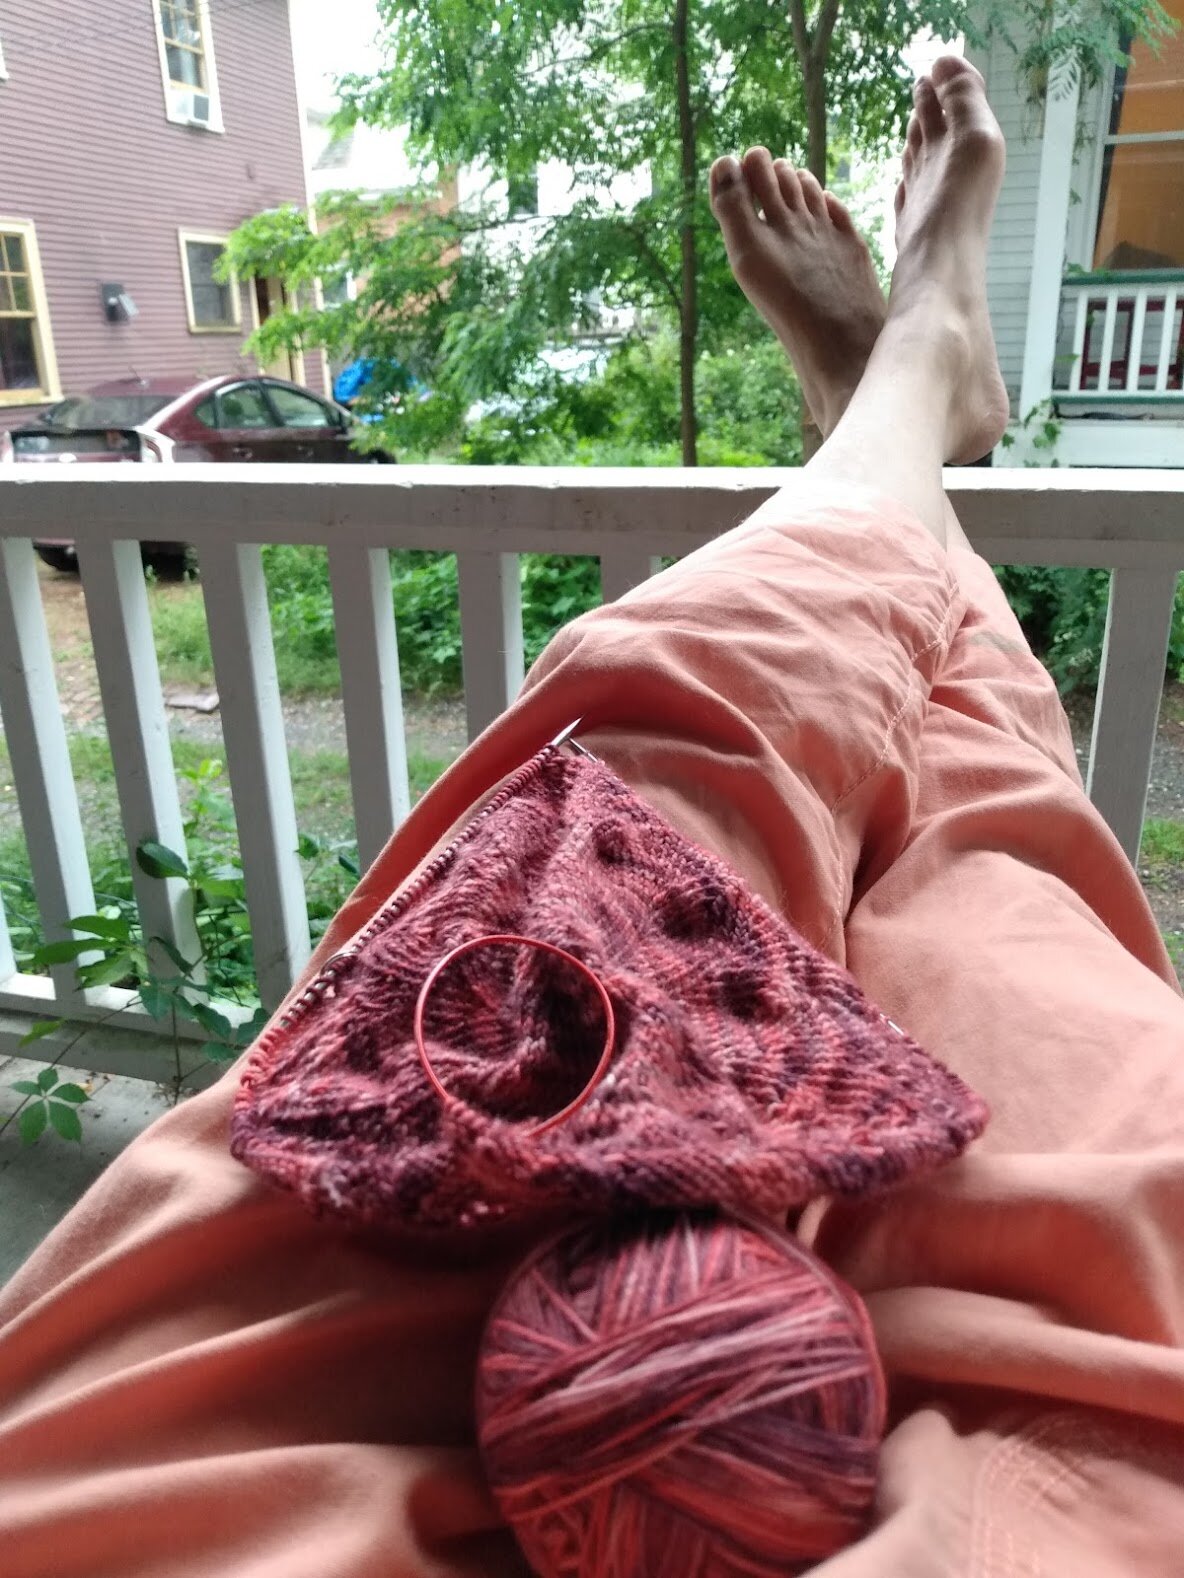 An image of a women’s lap (the blog author’s) and legs with knitting- part of my daily practice of self-care.